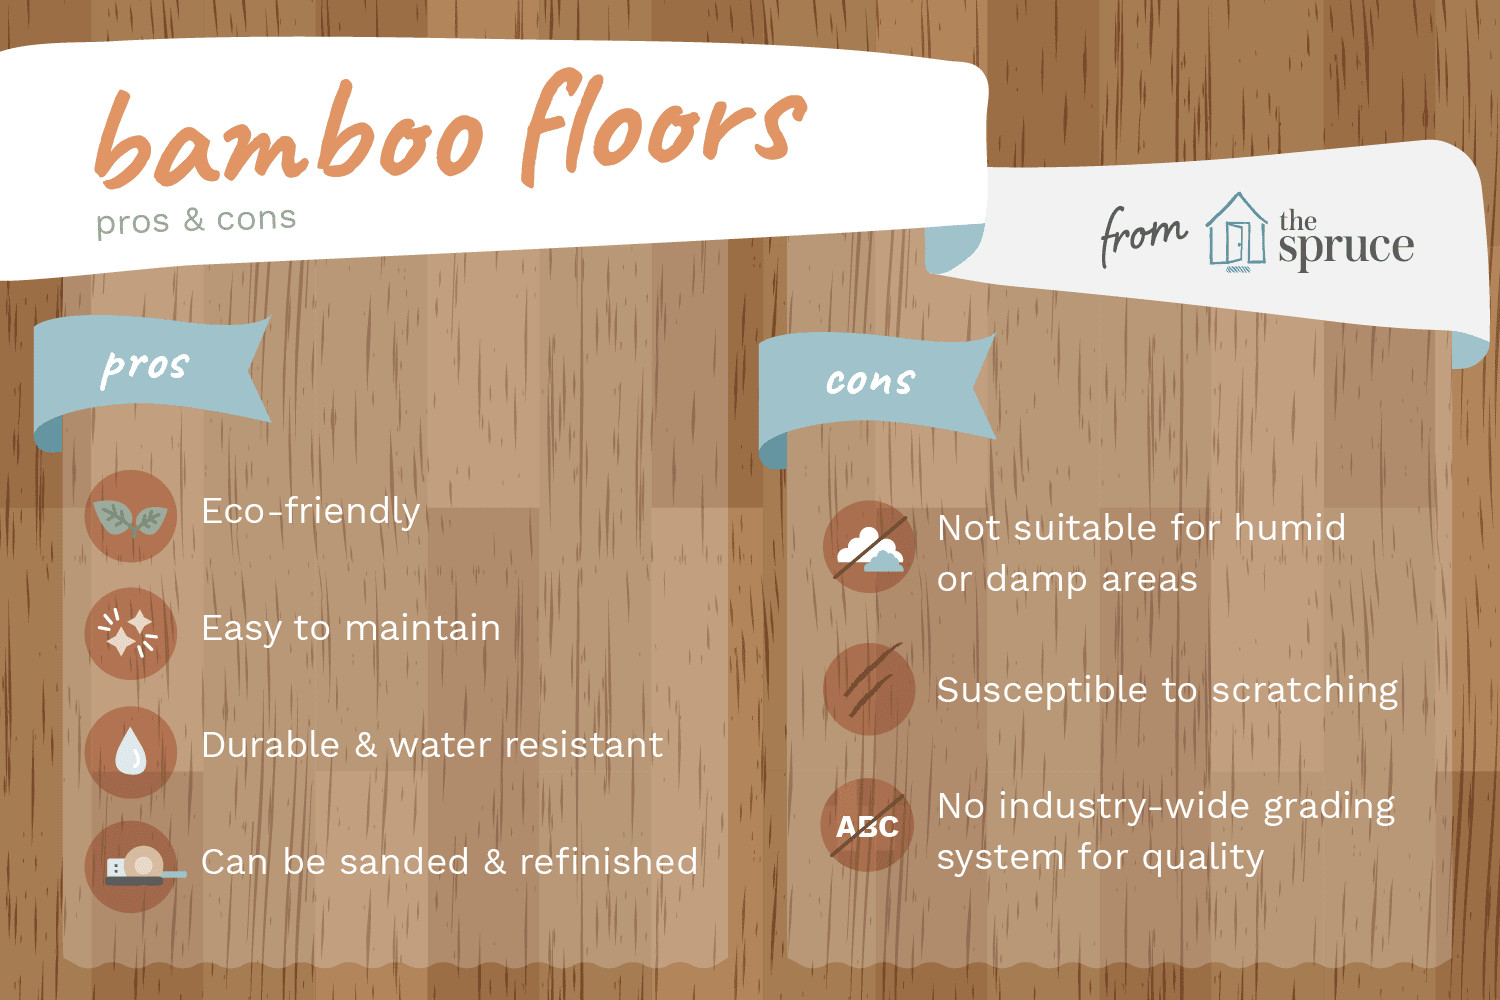 Floating Hardwood Floor Reviews Of the Advantages and Disadvantages Of Bamboo Flooring with Benefits and Drawbacks Of Bamboo Floors 1314694 V3 5b102fccff1b780036c0a4fa